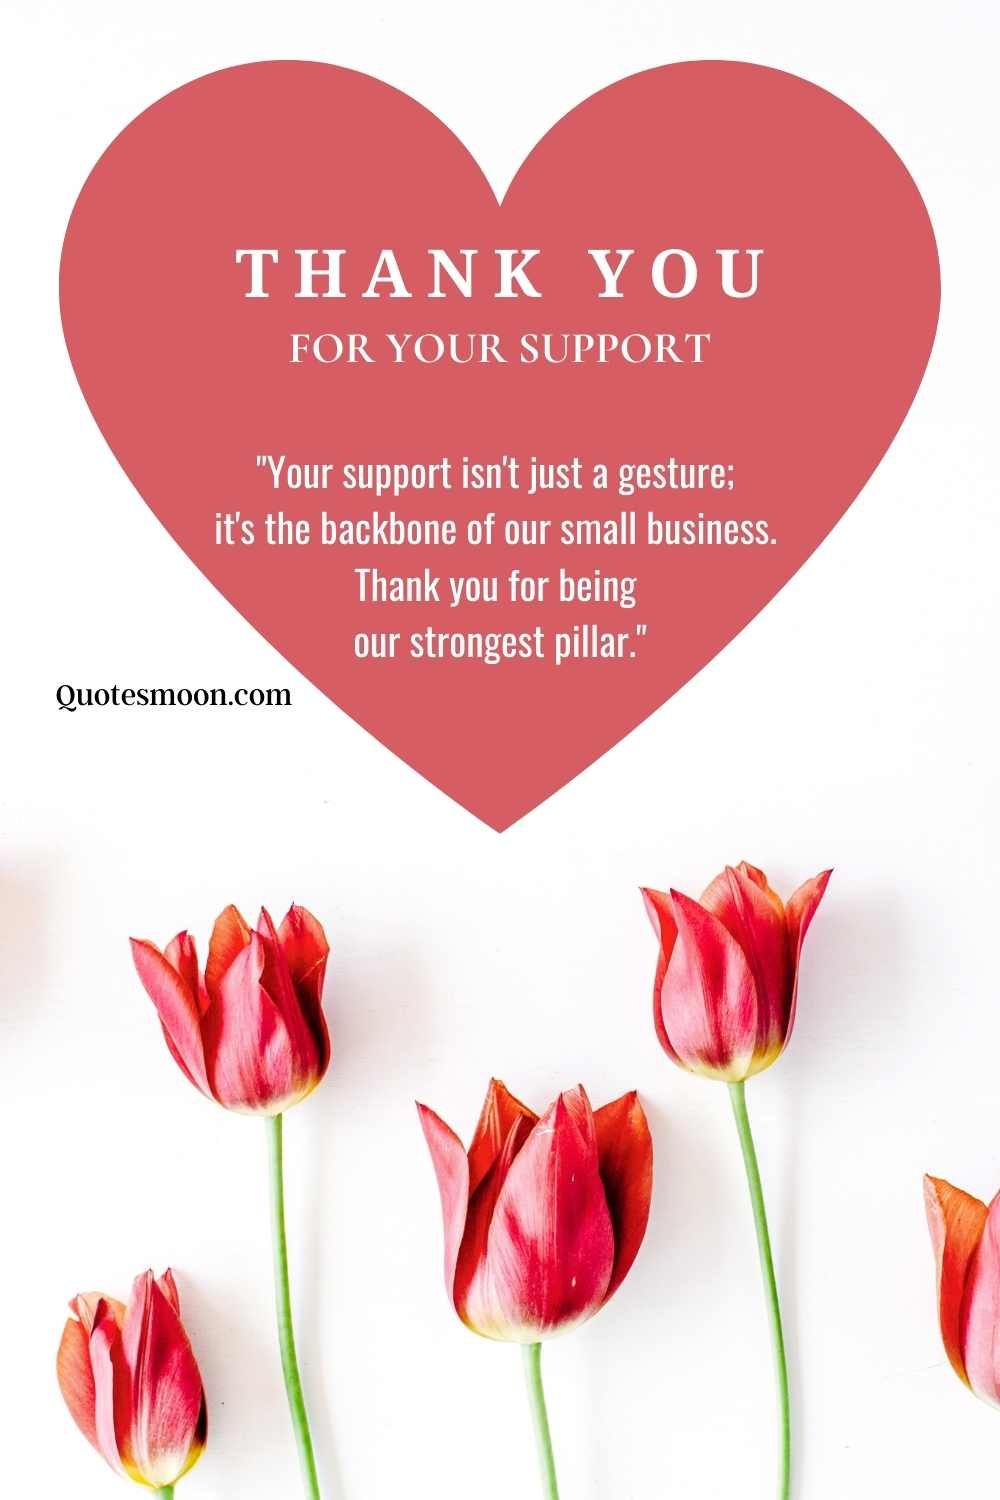 Small Business Quotes of Thankfulness with images